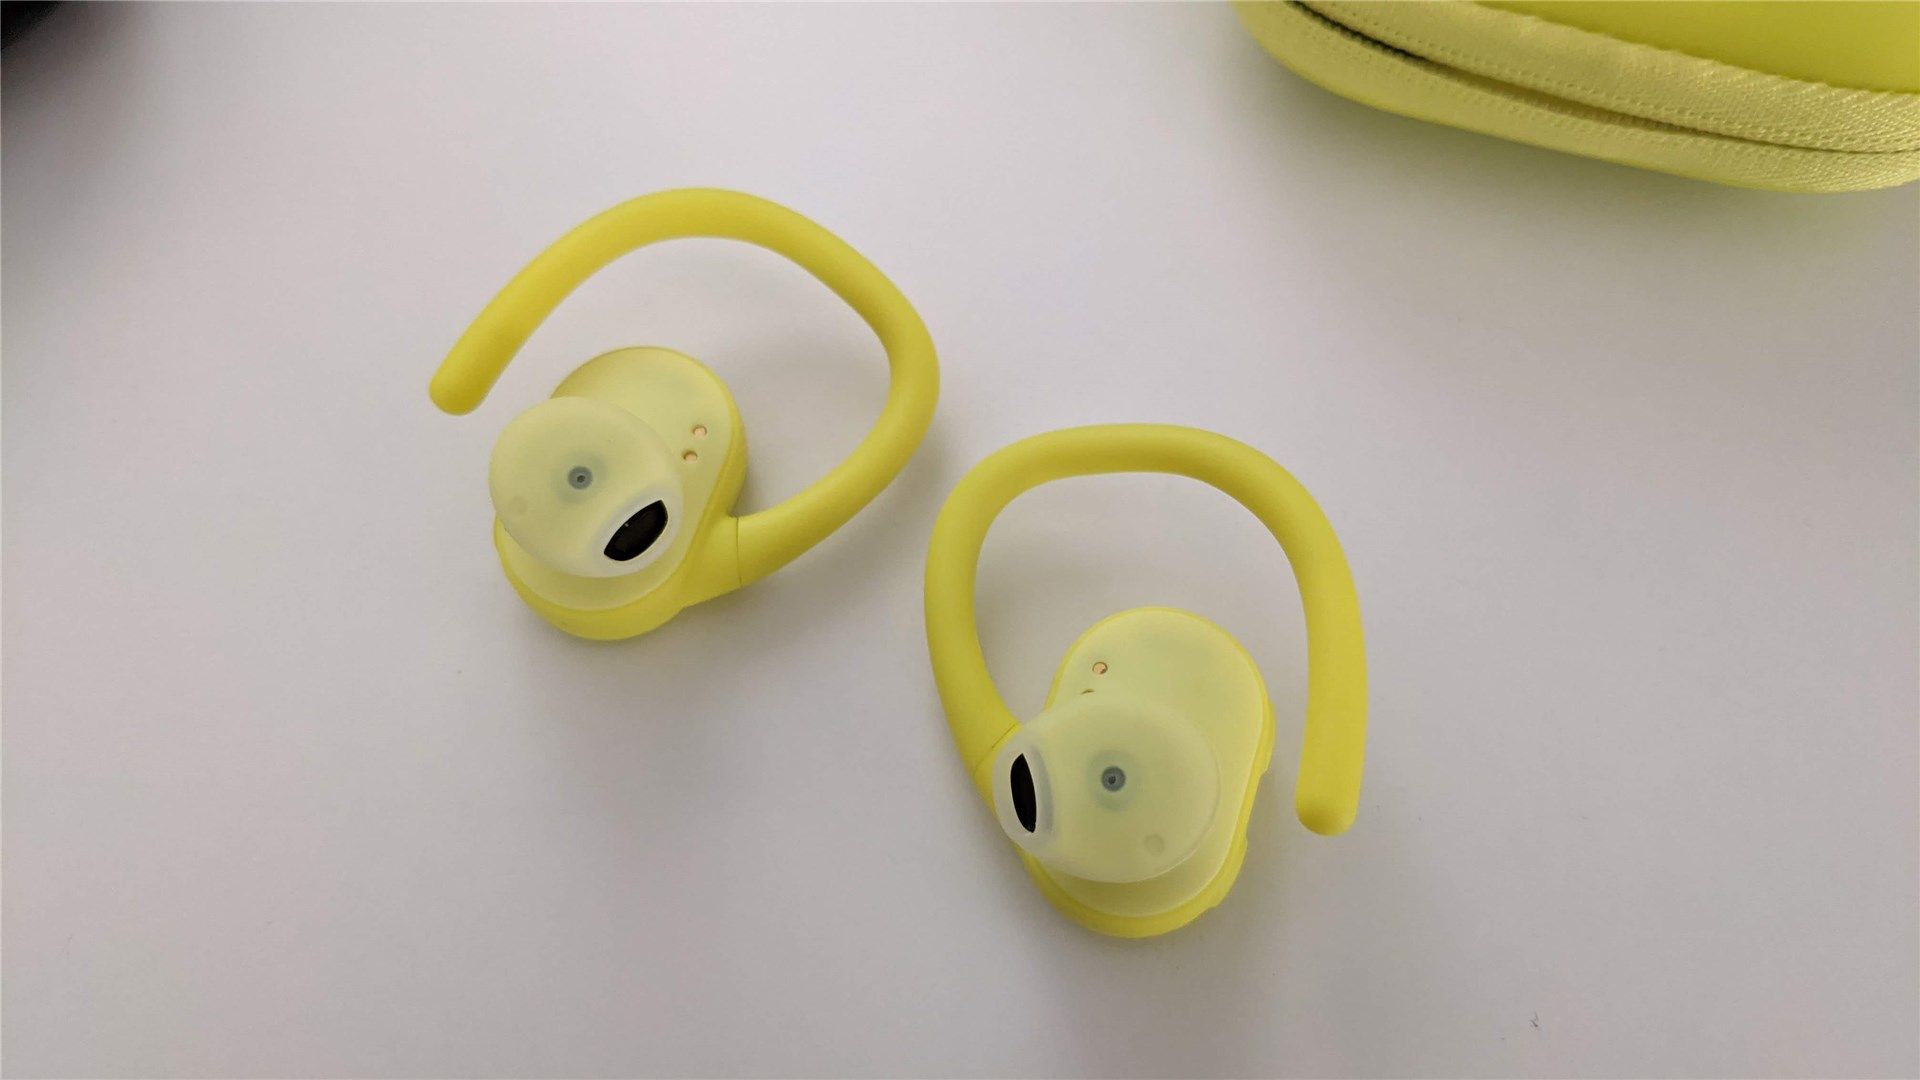 Showing the ear tip on the yellow Push Ultra